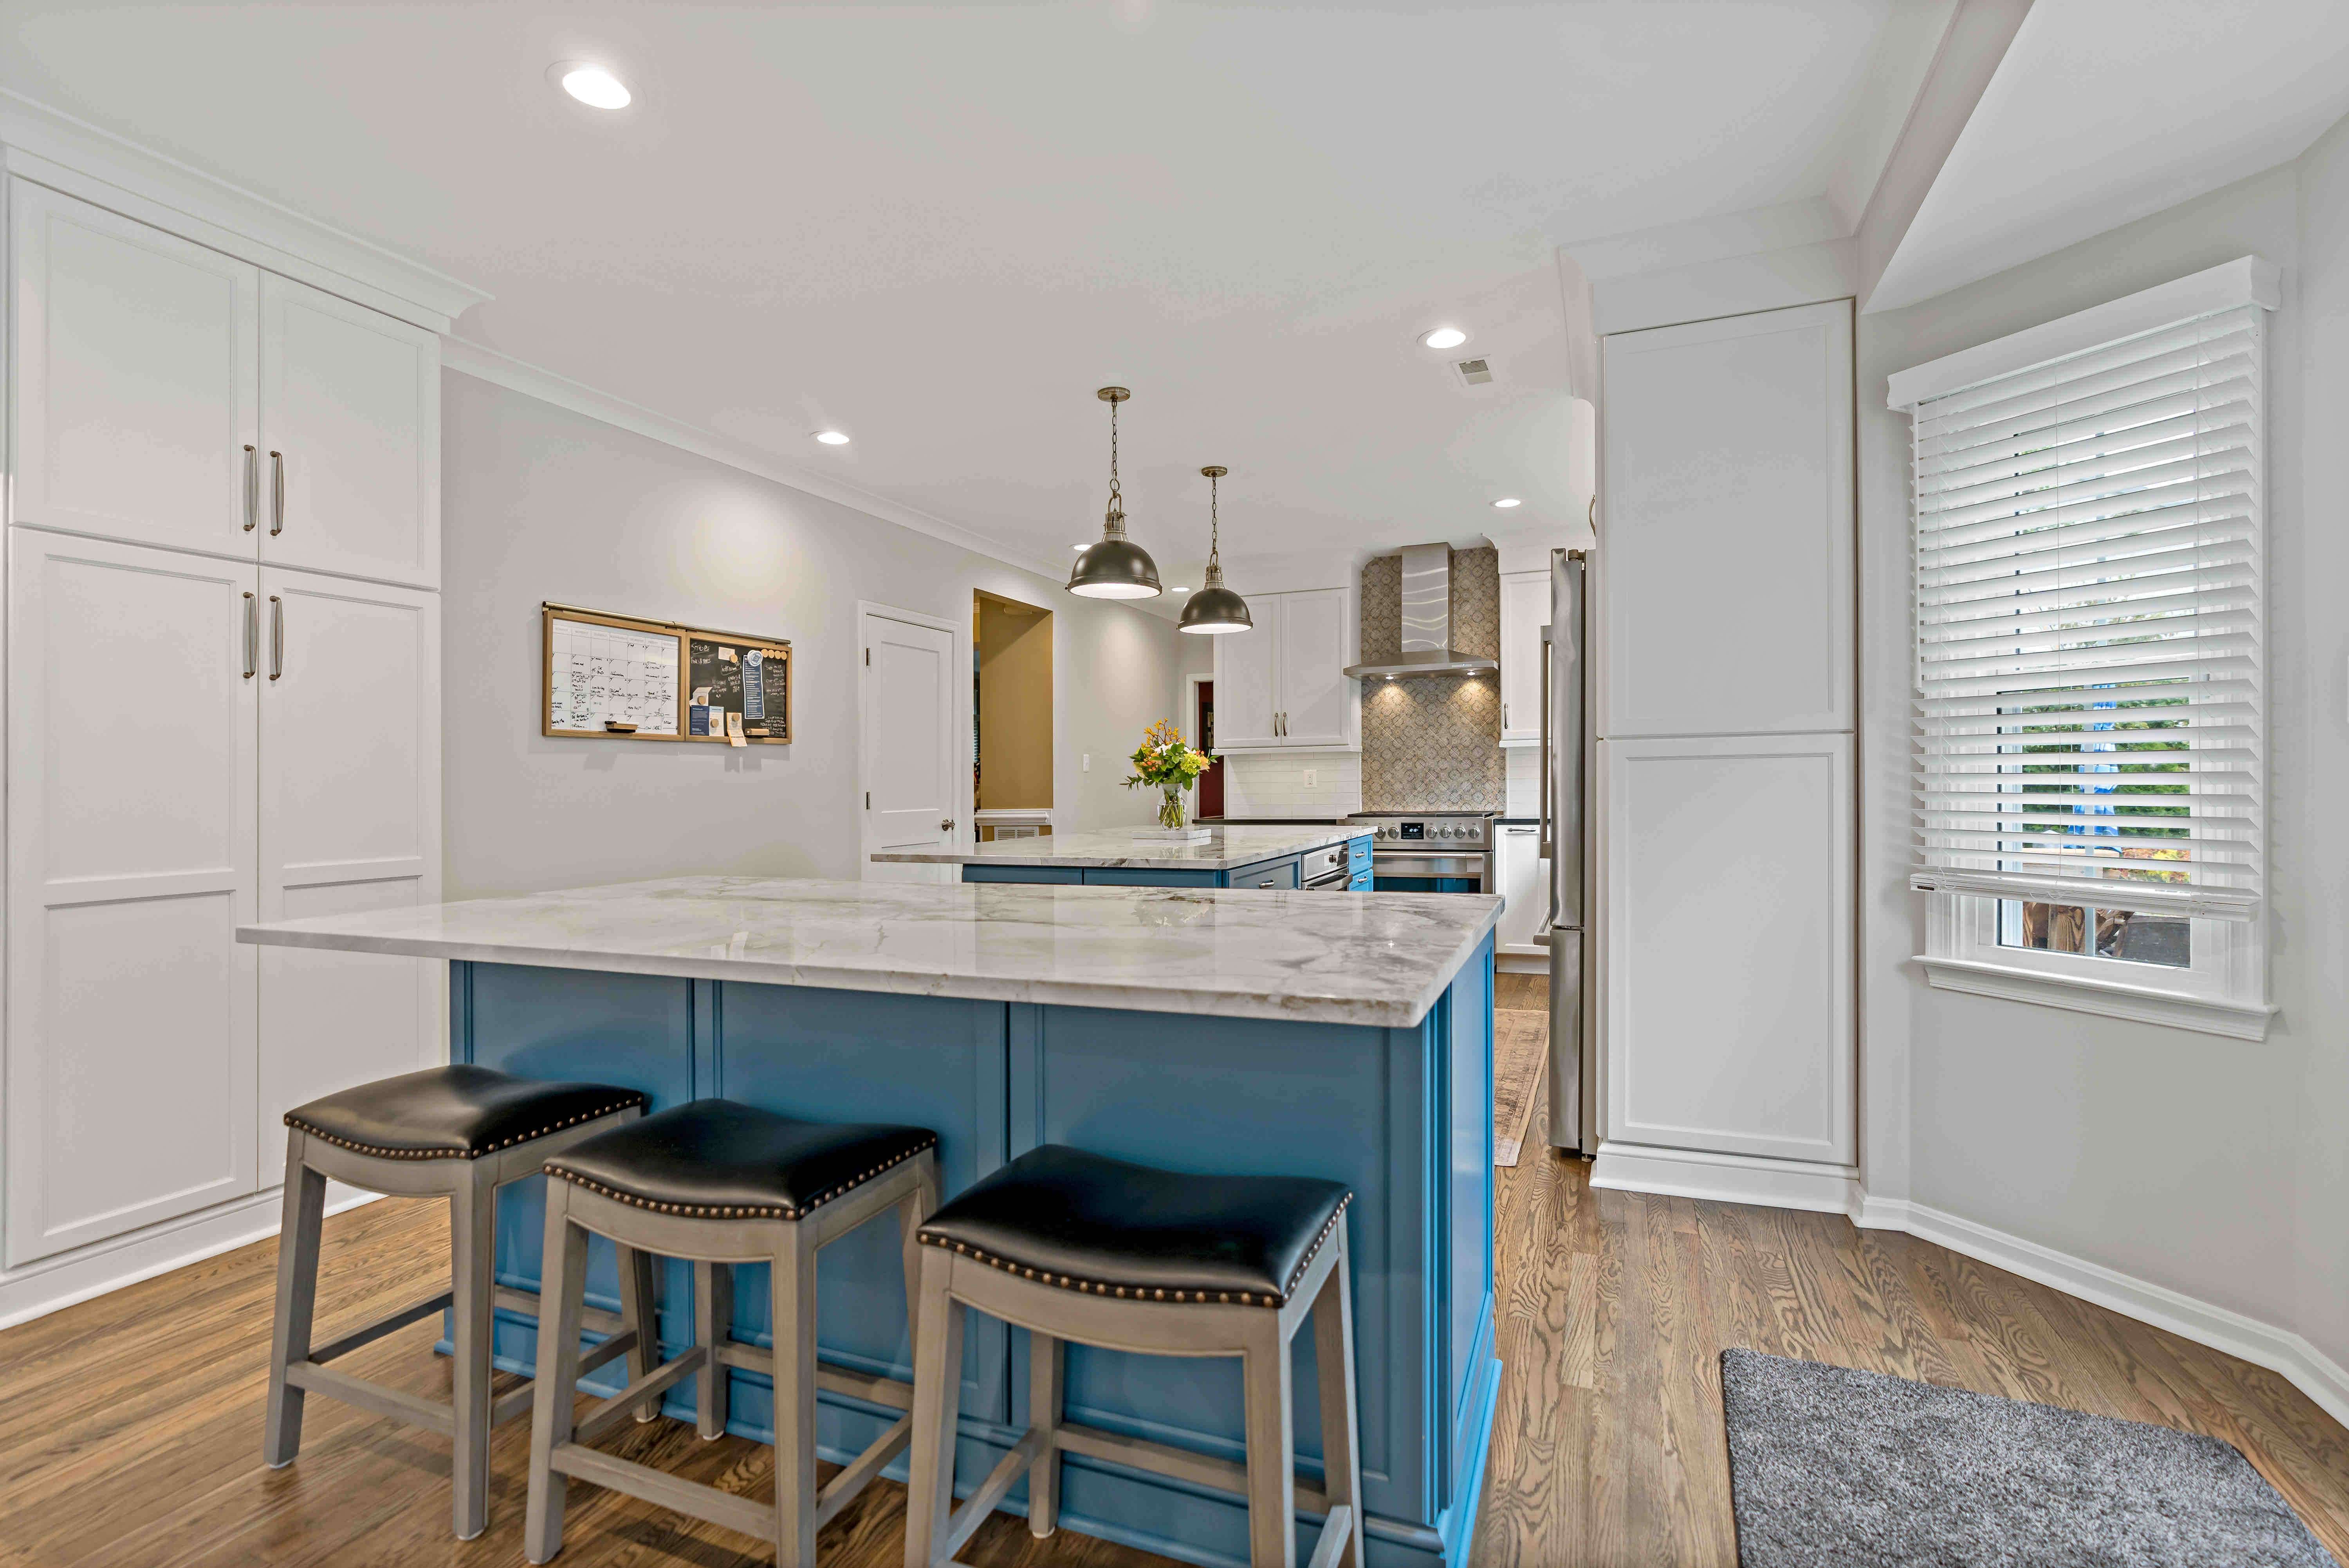 Two islands with seating in blue kitchen remodel